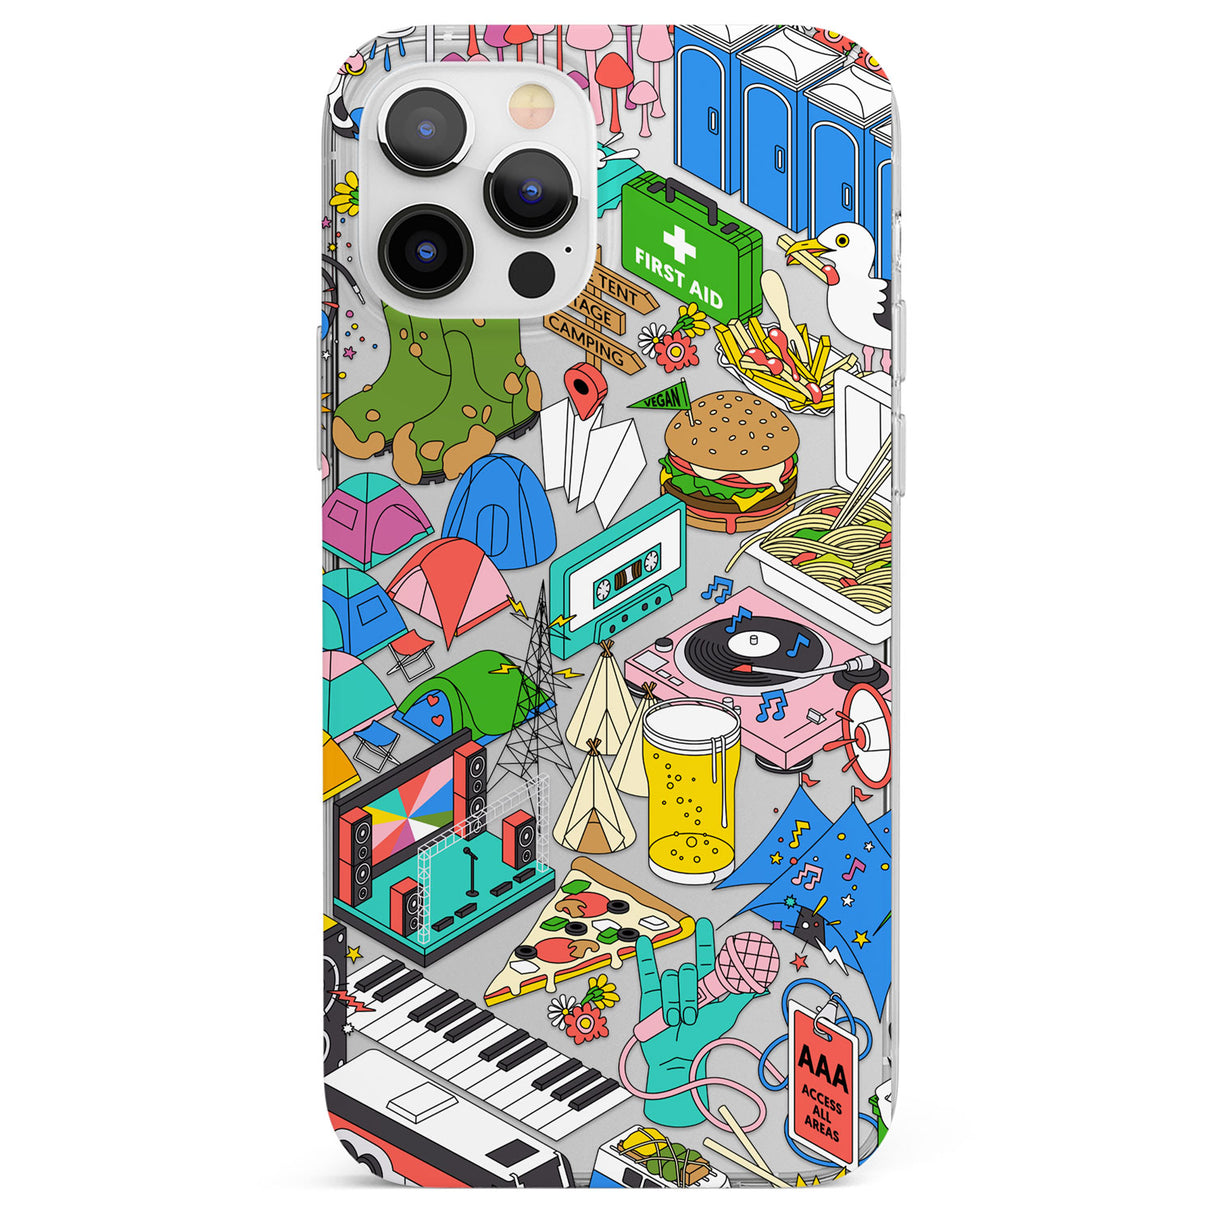 Festival Frenzy Phone Case for iPhone 12 Pro